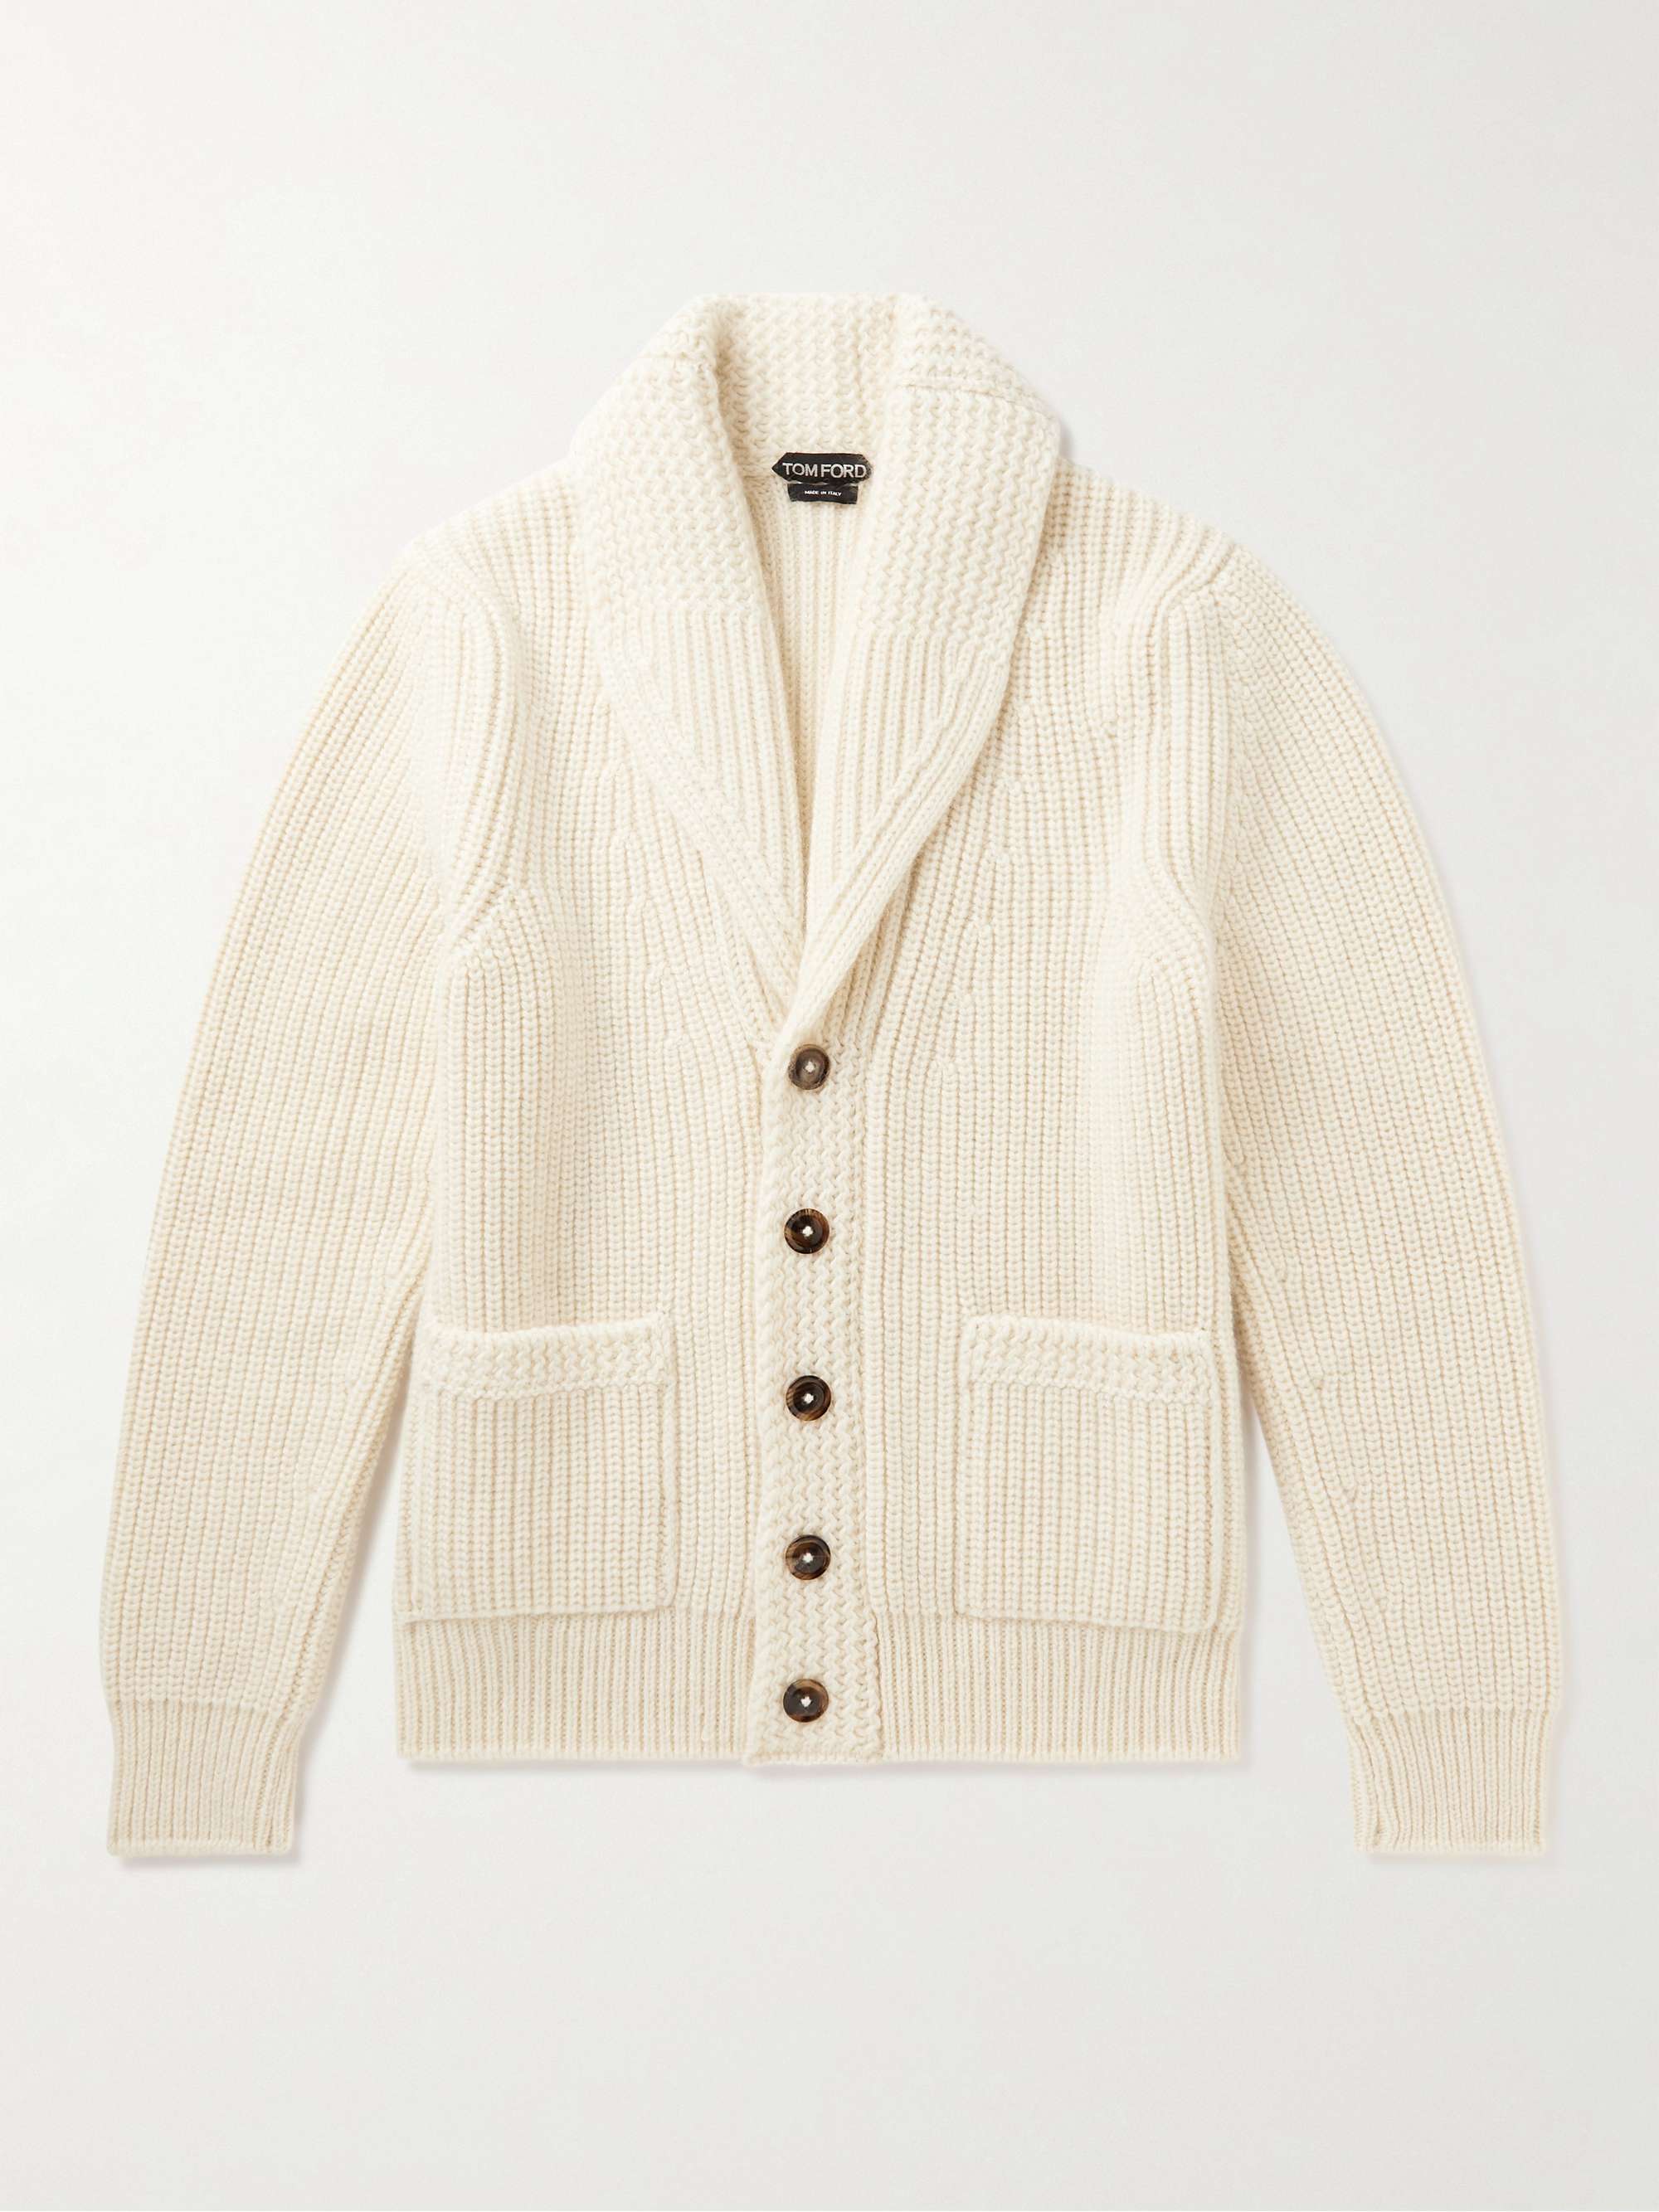 TOM FORD Shawl-Collar Cashmere and Mohair-Blend Cardigan